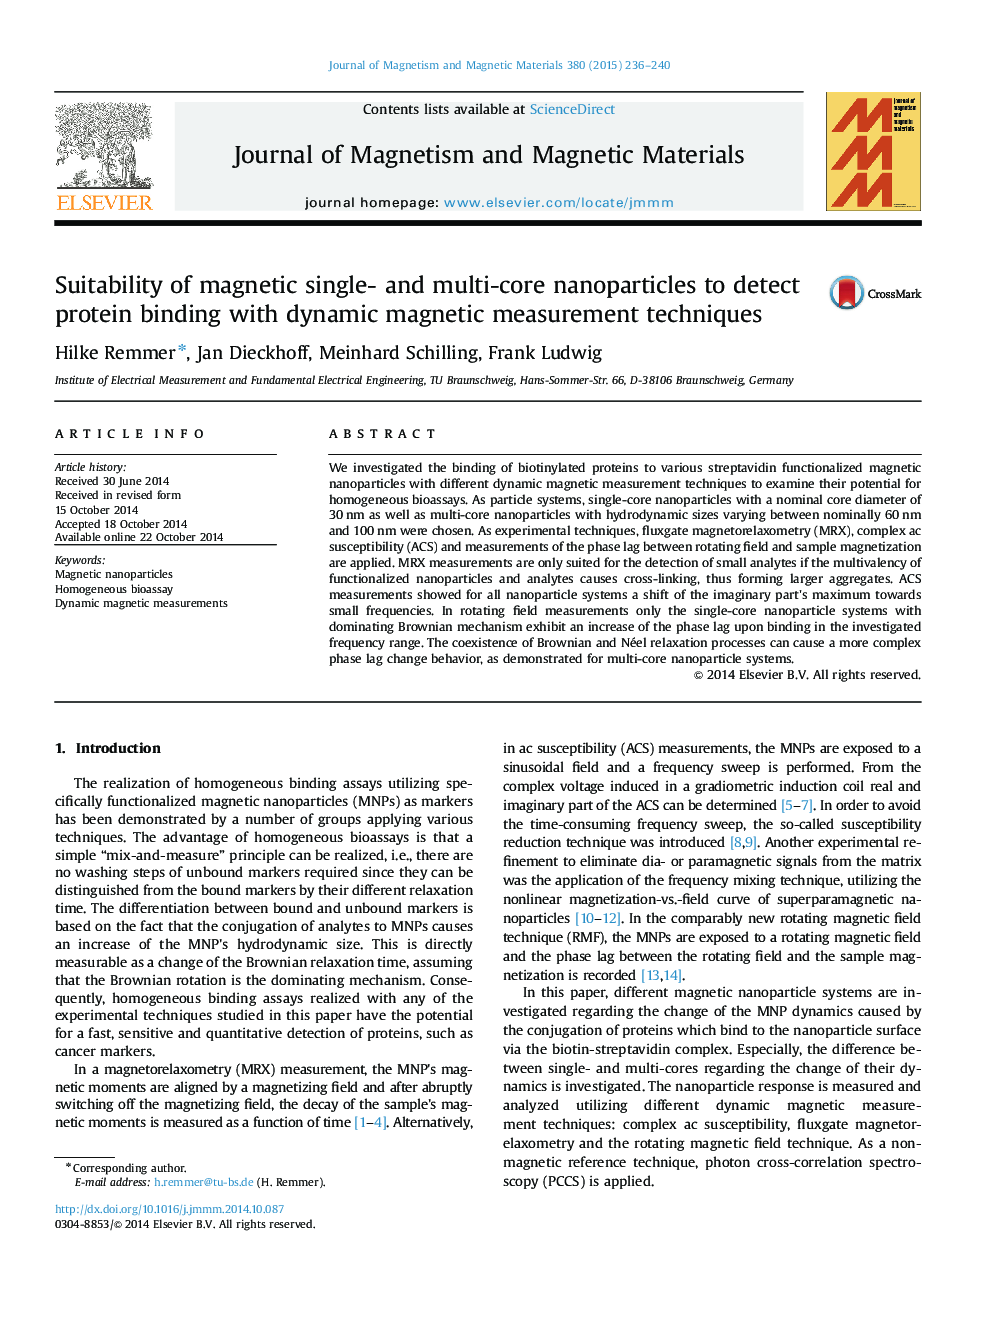 Suitability of magnetic single- and multi-core nanoparticles to detect protein binding with dynamic magnetic measurement techniques